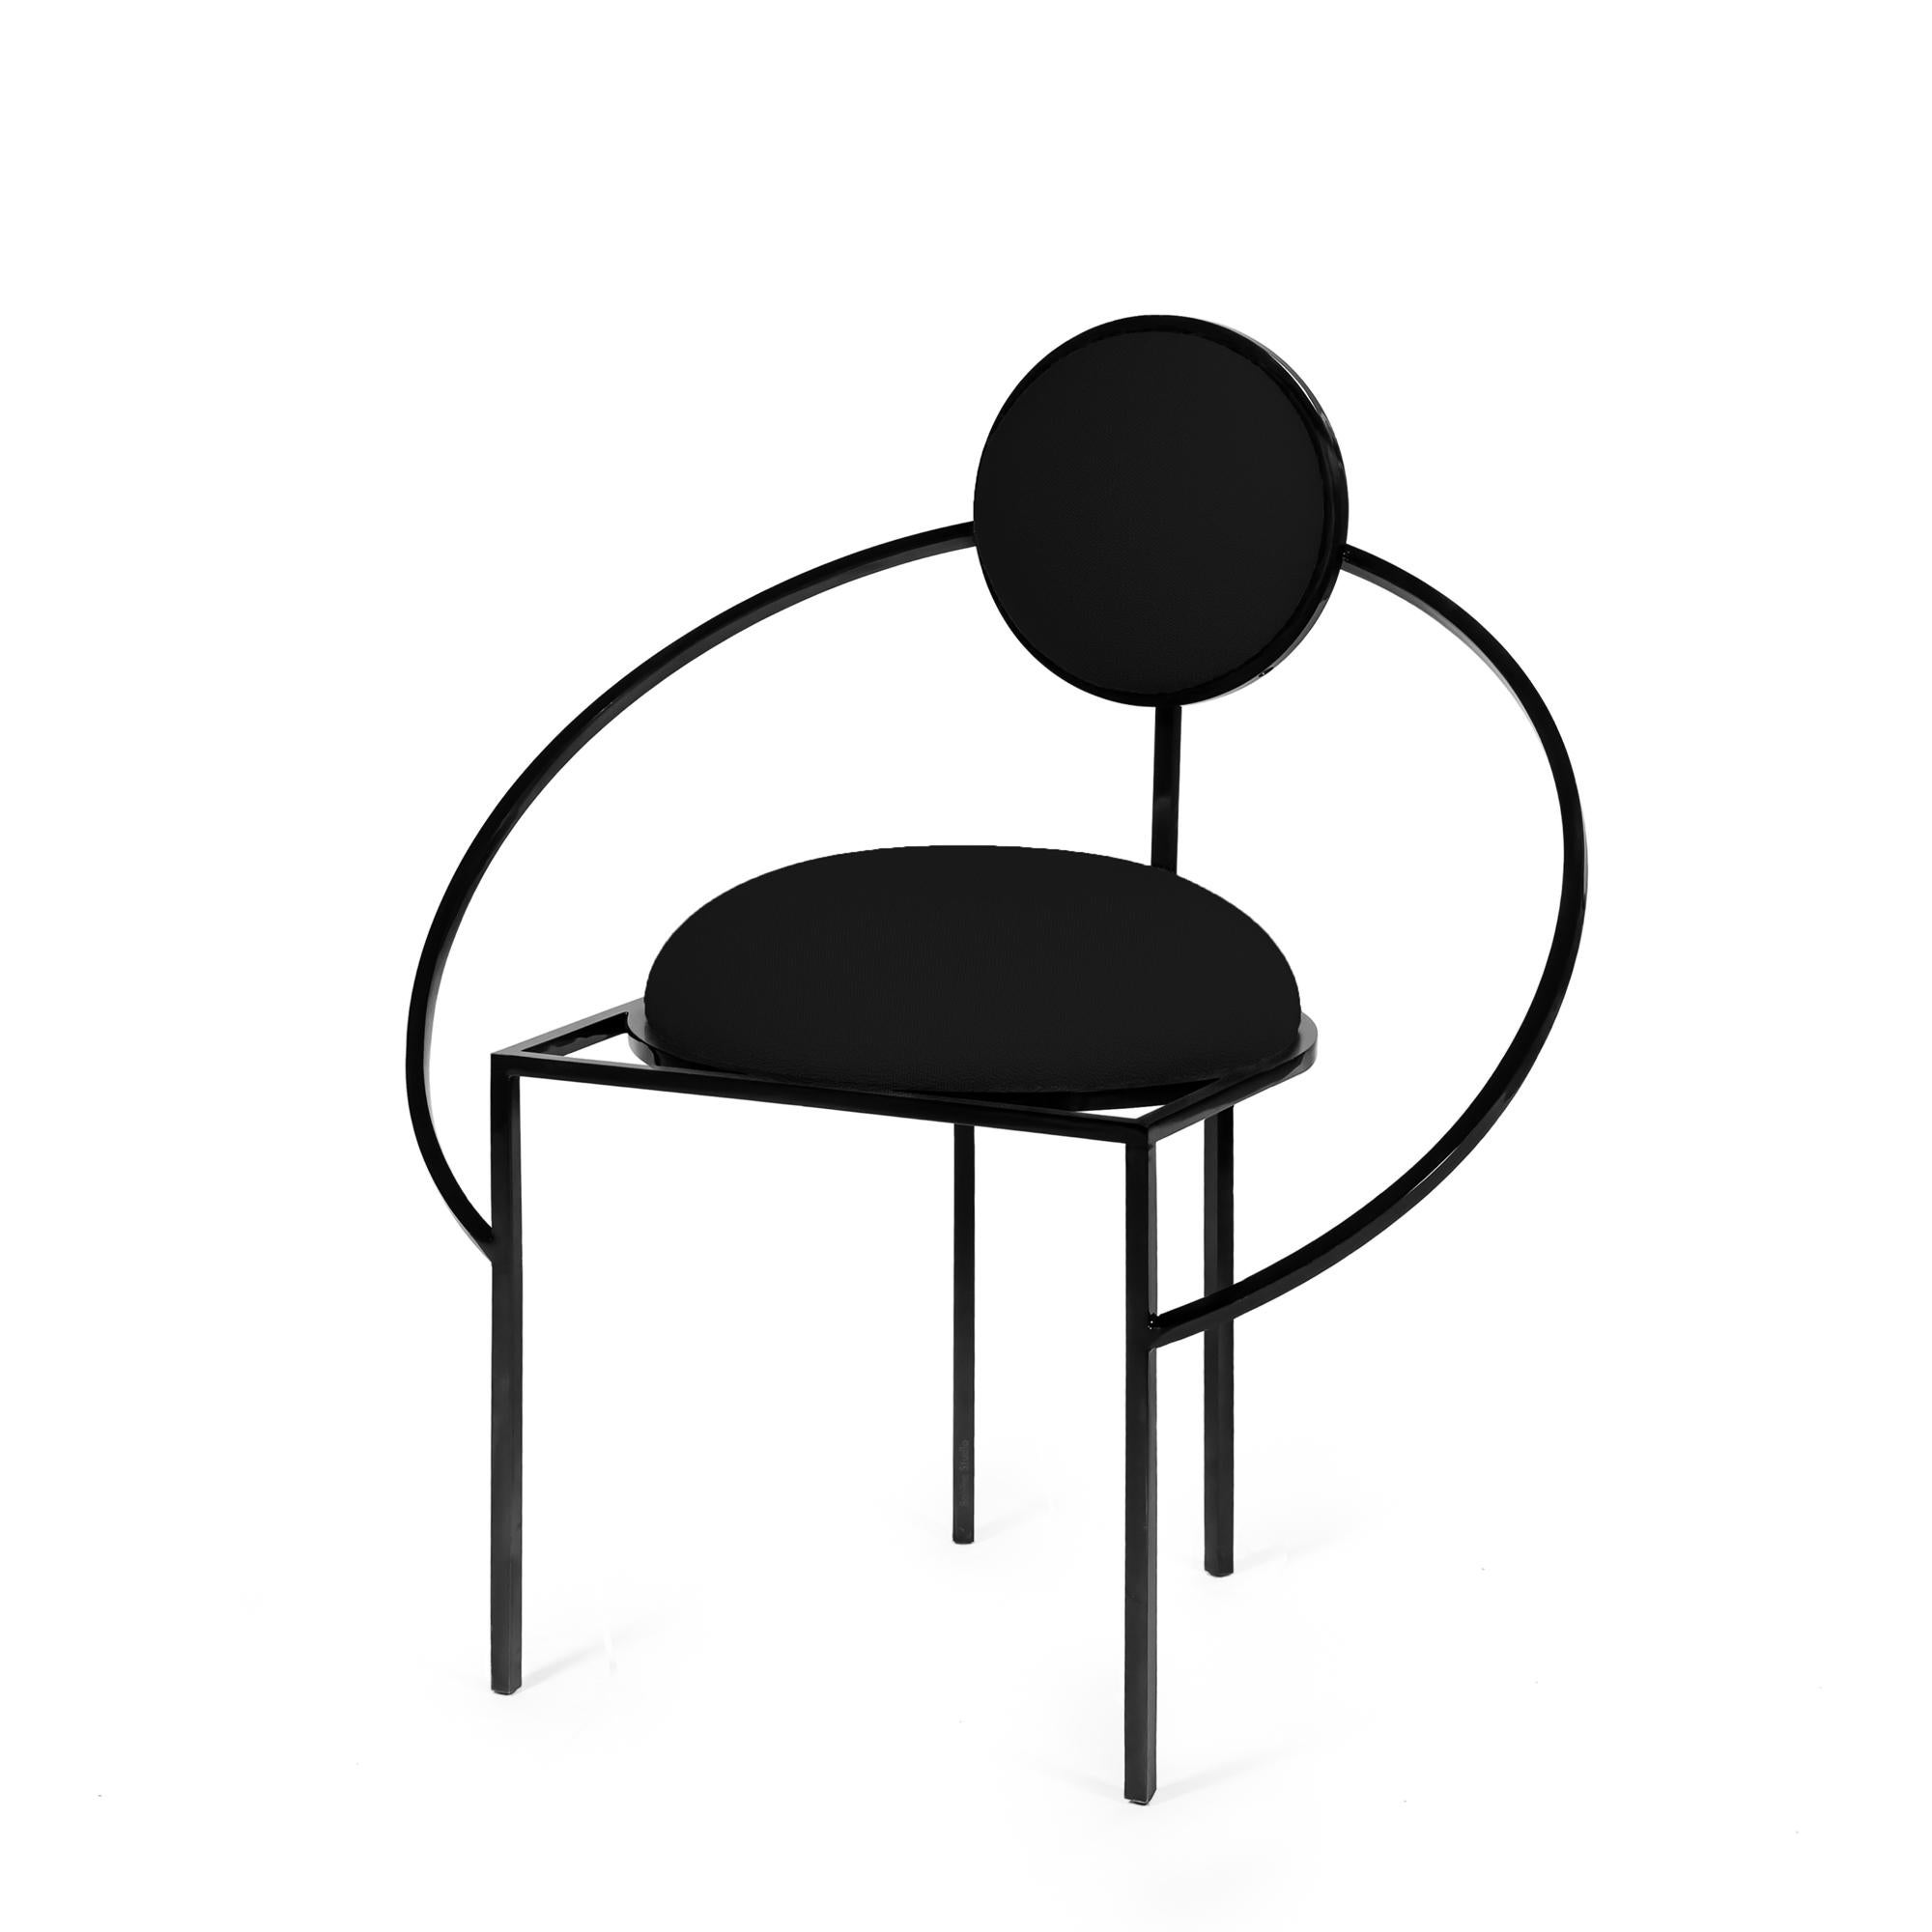 This is the first time that Bohinc explores a design favourite; the chair.

In the collection, Lara Bohinc develops her stellar themes, finding inspiration in planetary and lunar orbits, whose gravitationally curved trajectories drive the lines and